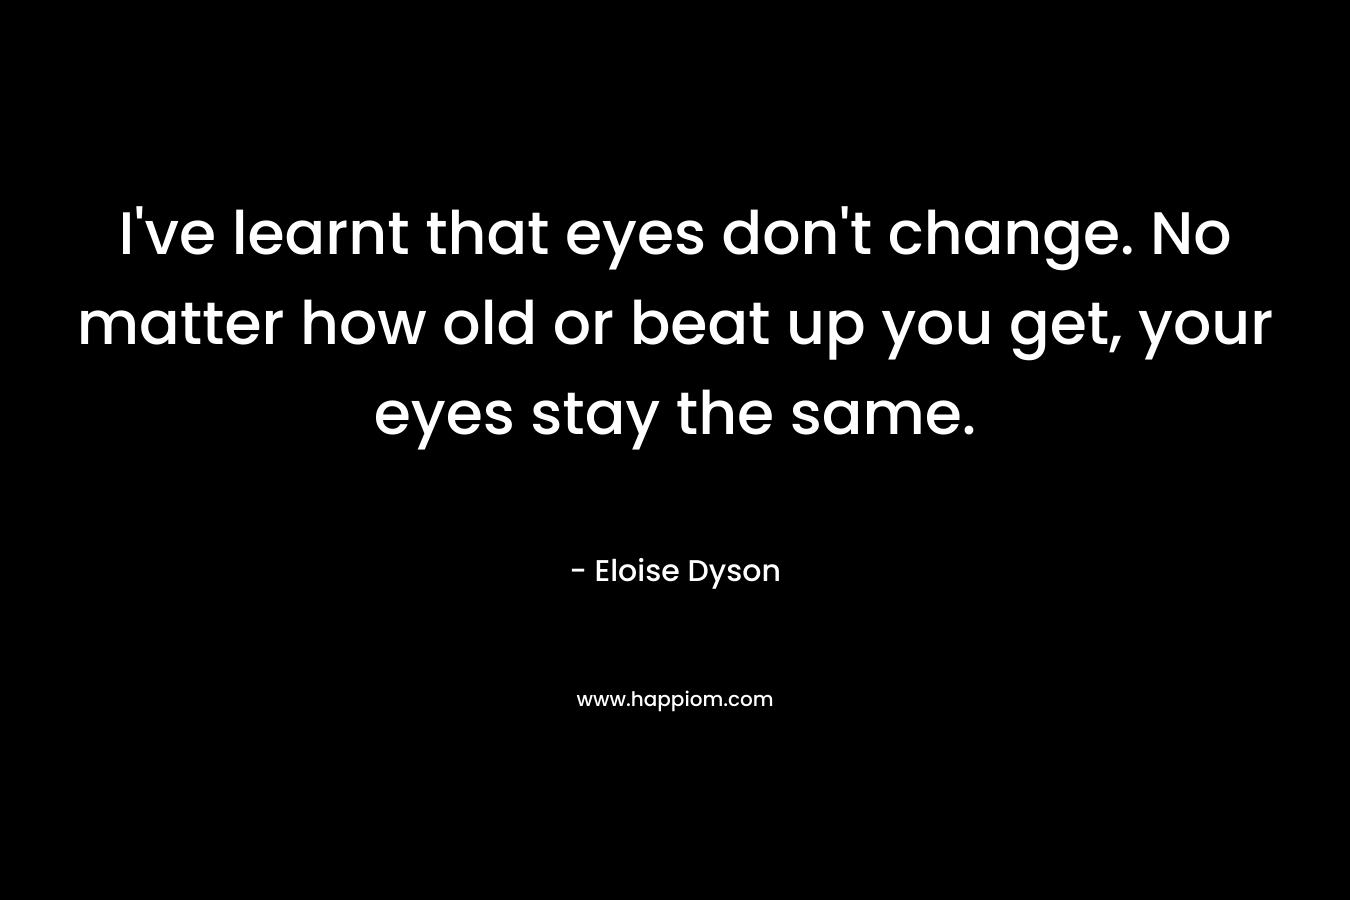 I've learnt that eyes don't change. No matter how old or beat up you get, your eyes stay the same.